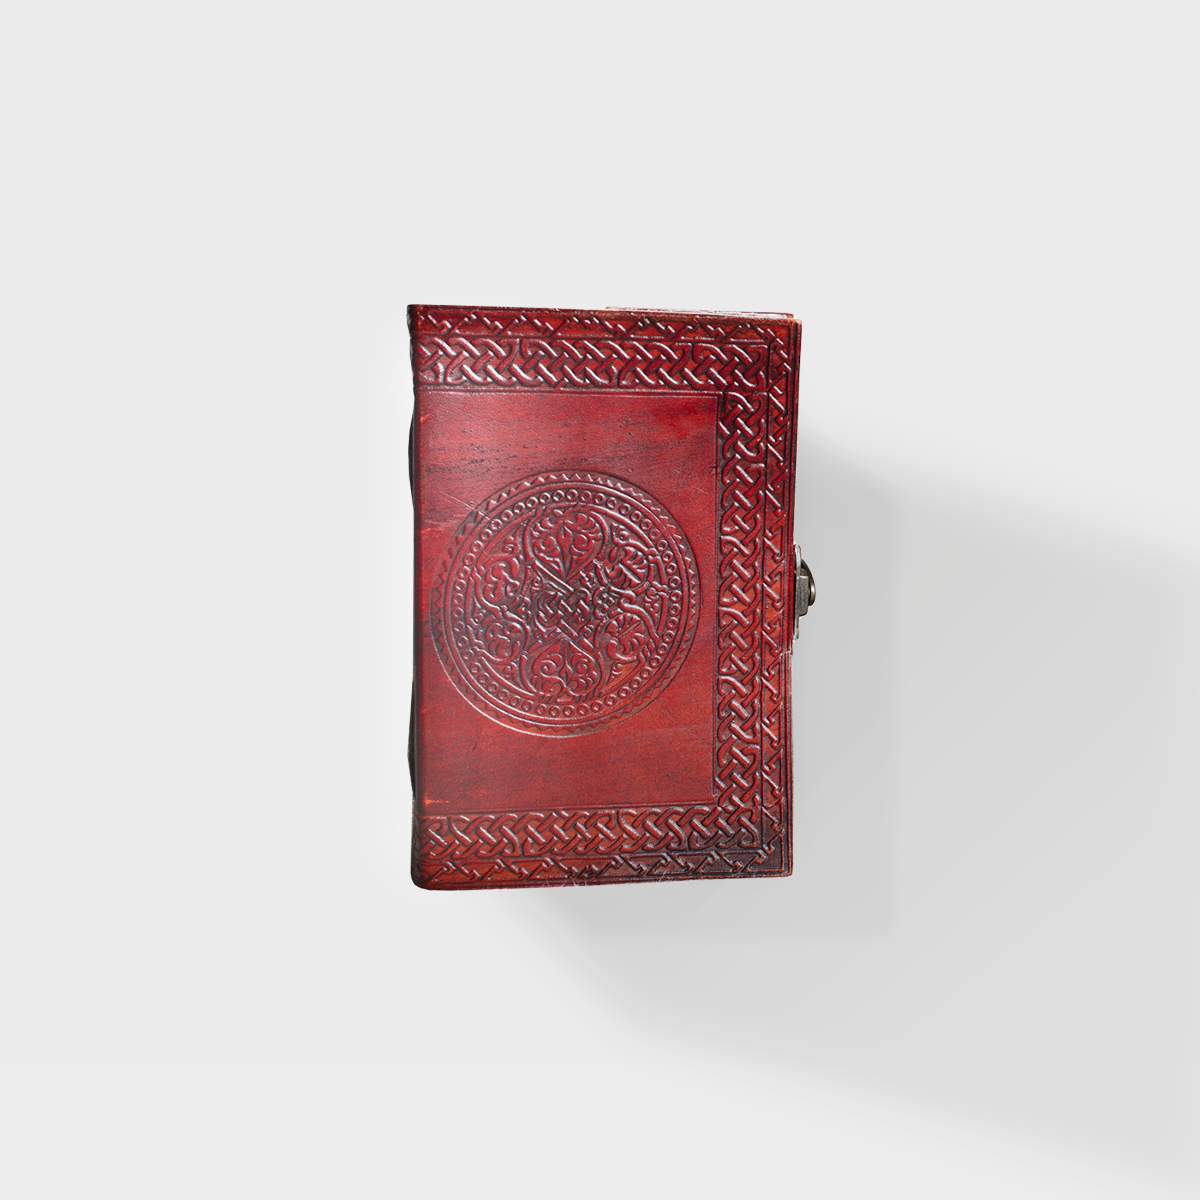 Entangled Celtic Hearts - 6x9 - Leather Journal